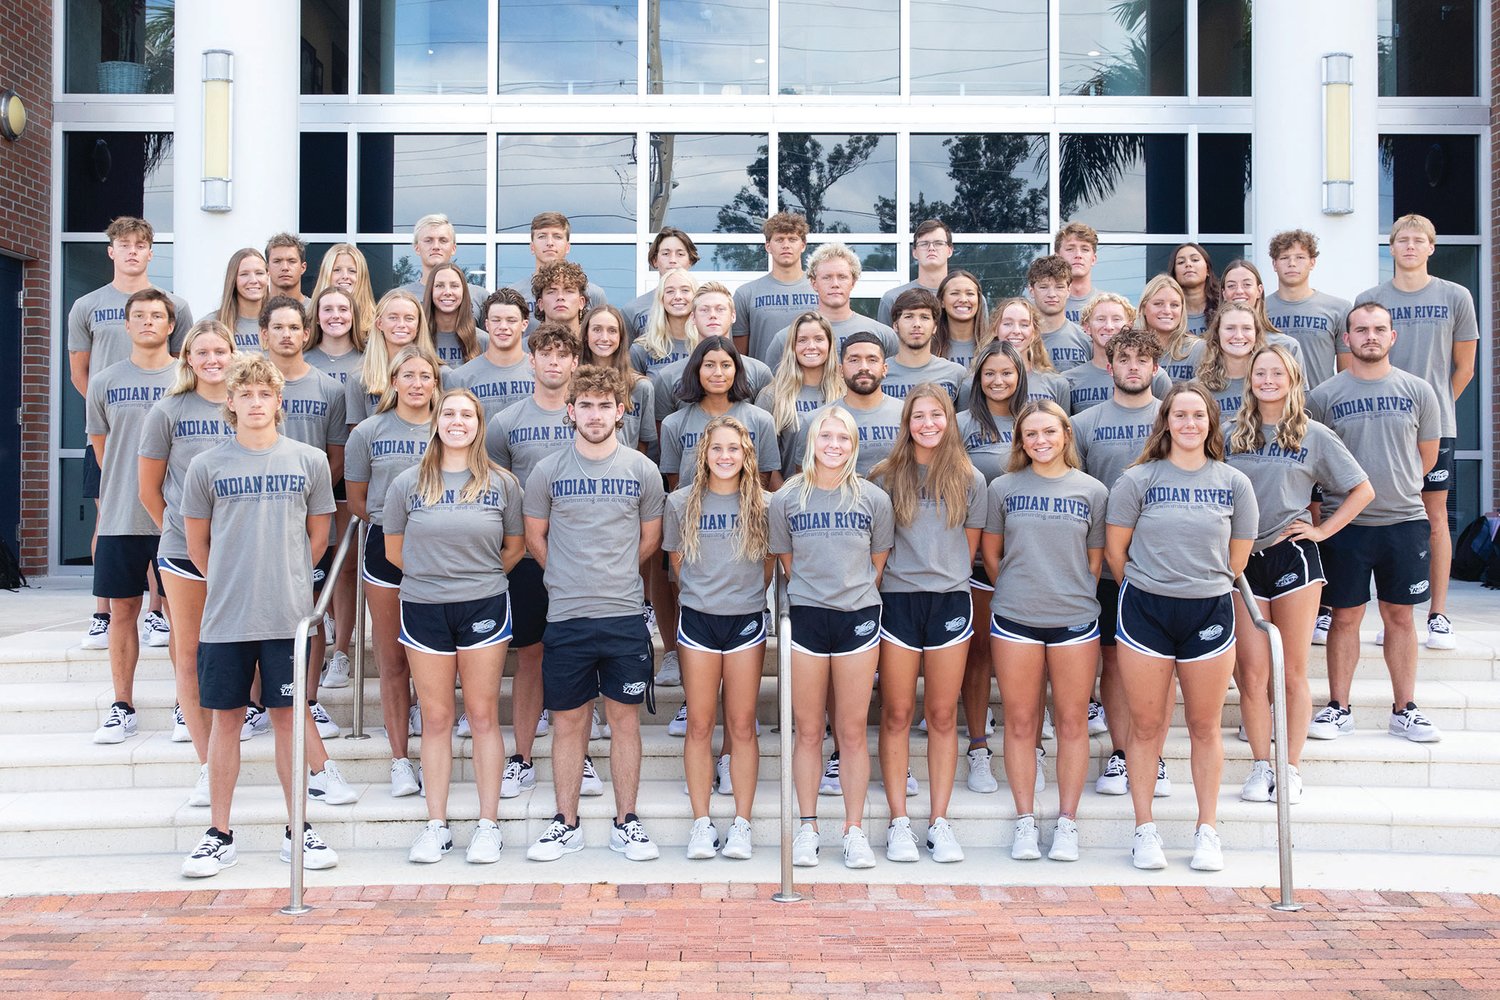 Congratulations to the IRSC men and women’s swimming and diving teams for their hard work and continued perseverance. Indian River is pioneer proud of our swimming and dive teams!